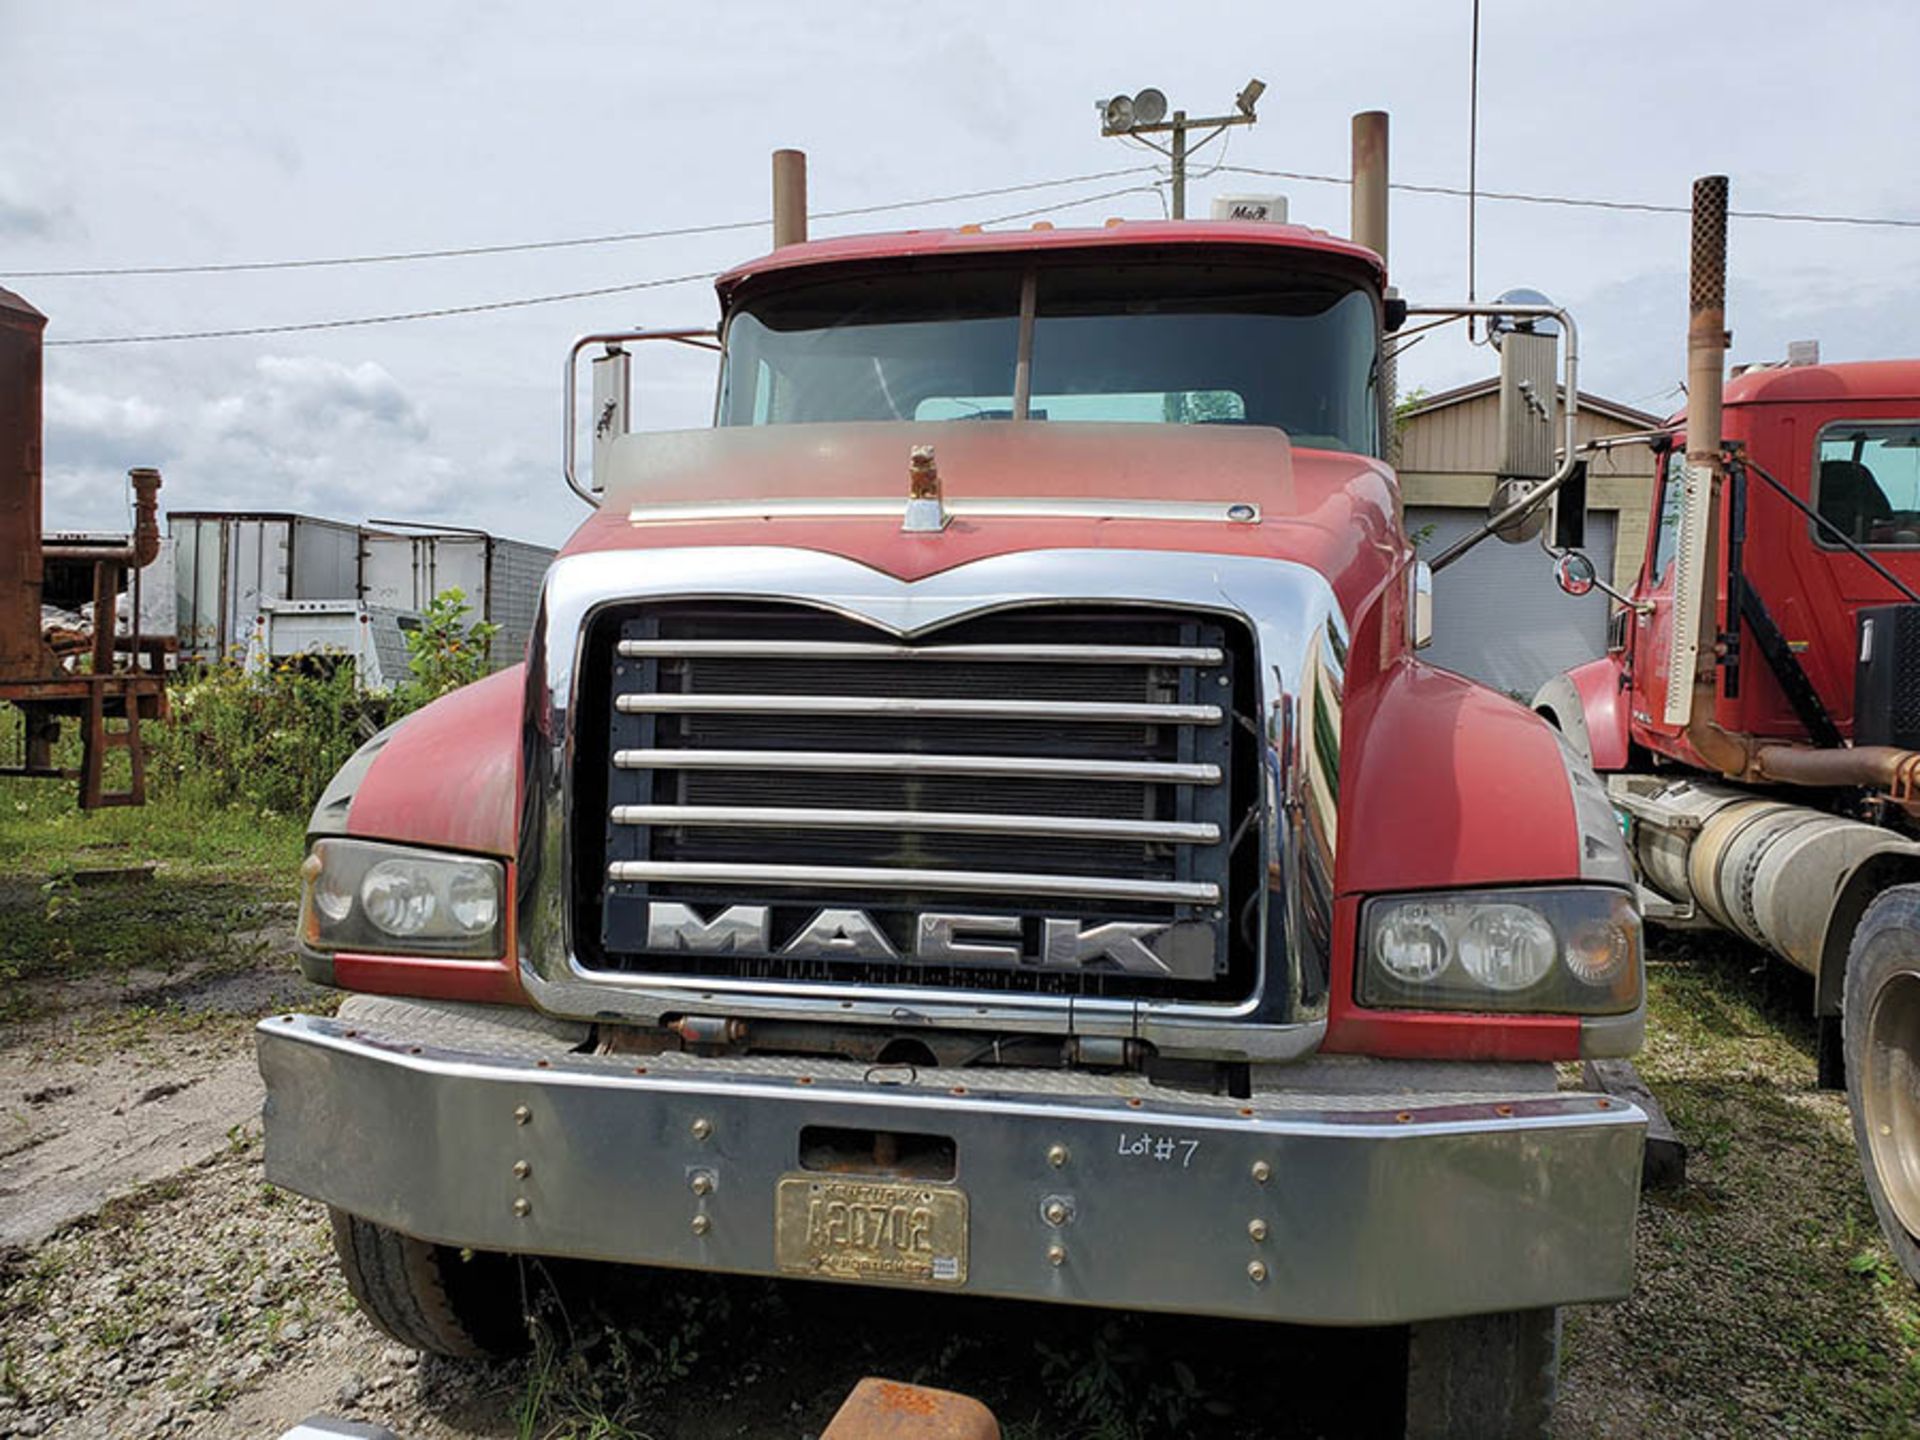 2009 MACK GU713 T/A DAY CAB TRACTOR, MAXITORQUE 18 SPEED TRANS., WET LINES MACK INLINE SIX DIESEL - Image 2 of 11